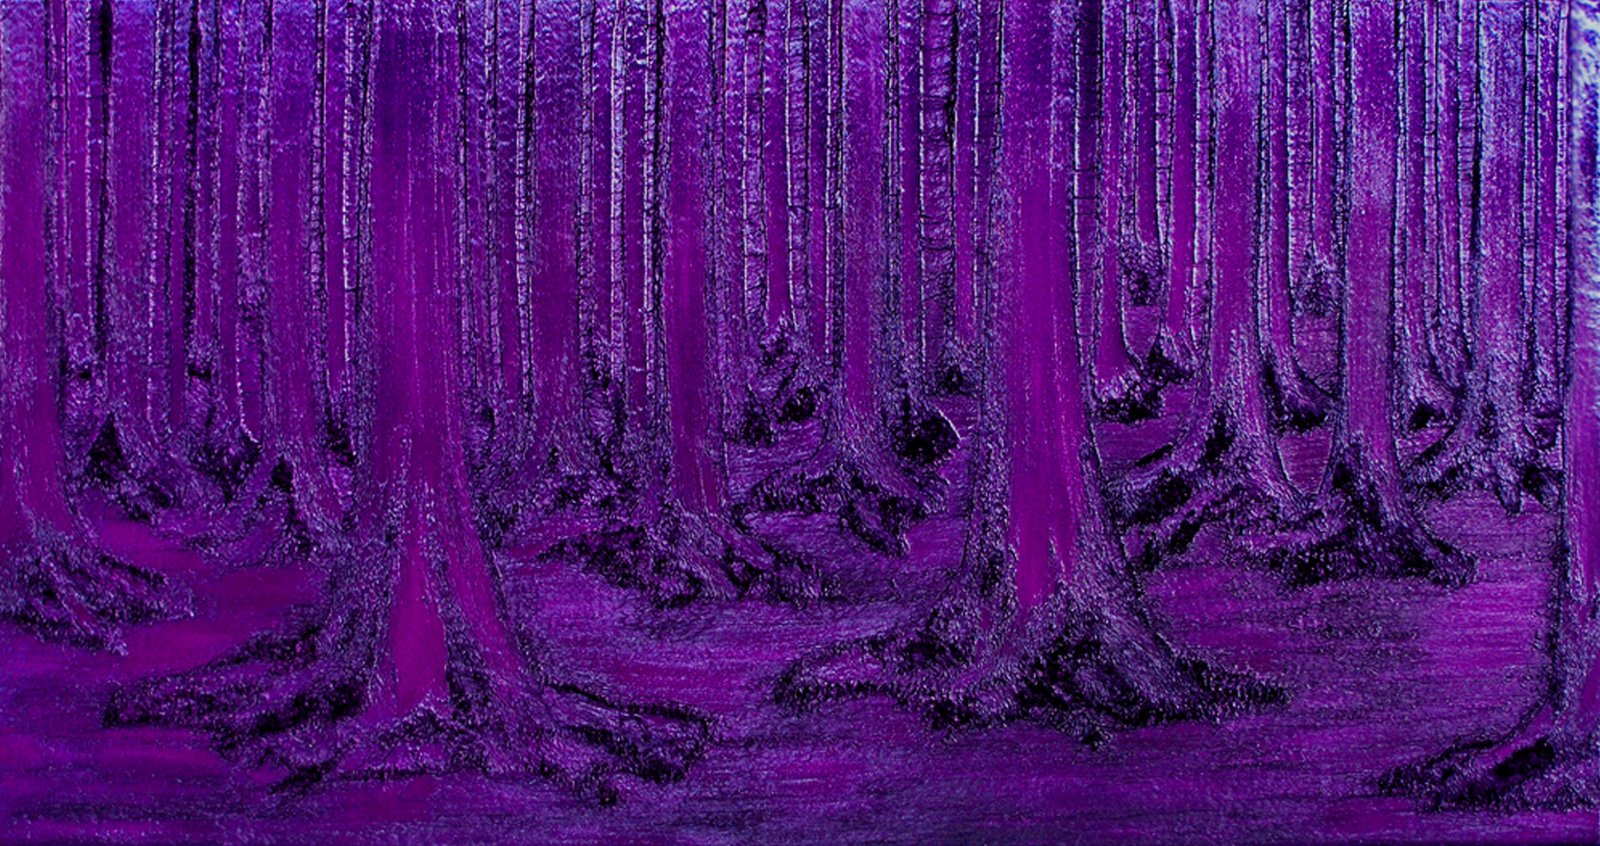 Forest Edge, a painting by Guido Vrolix